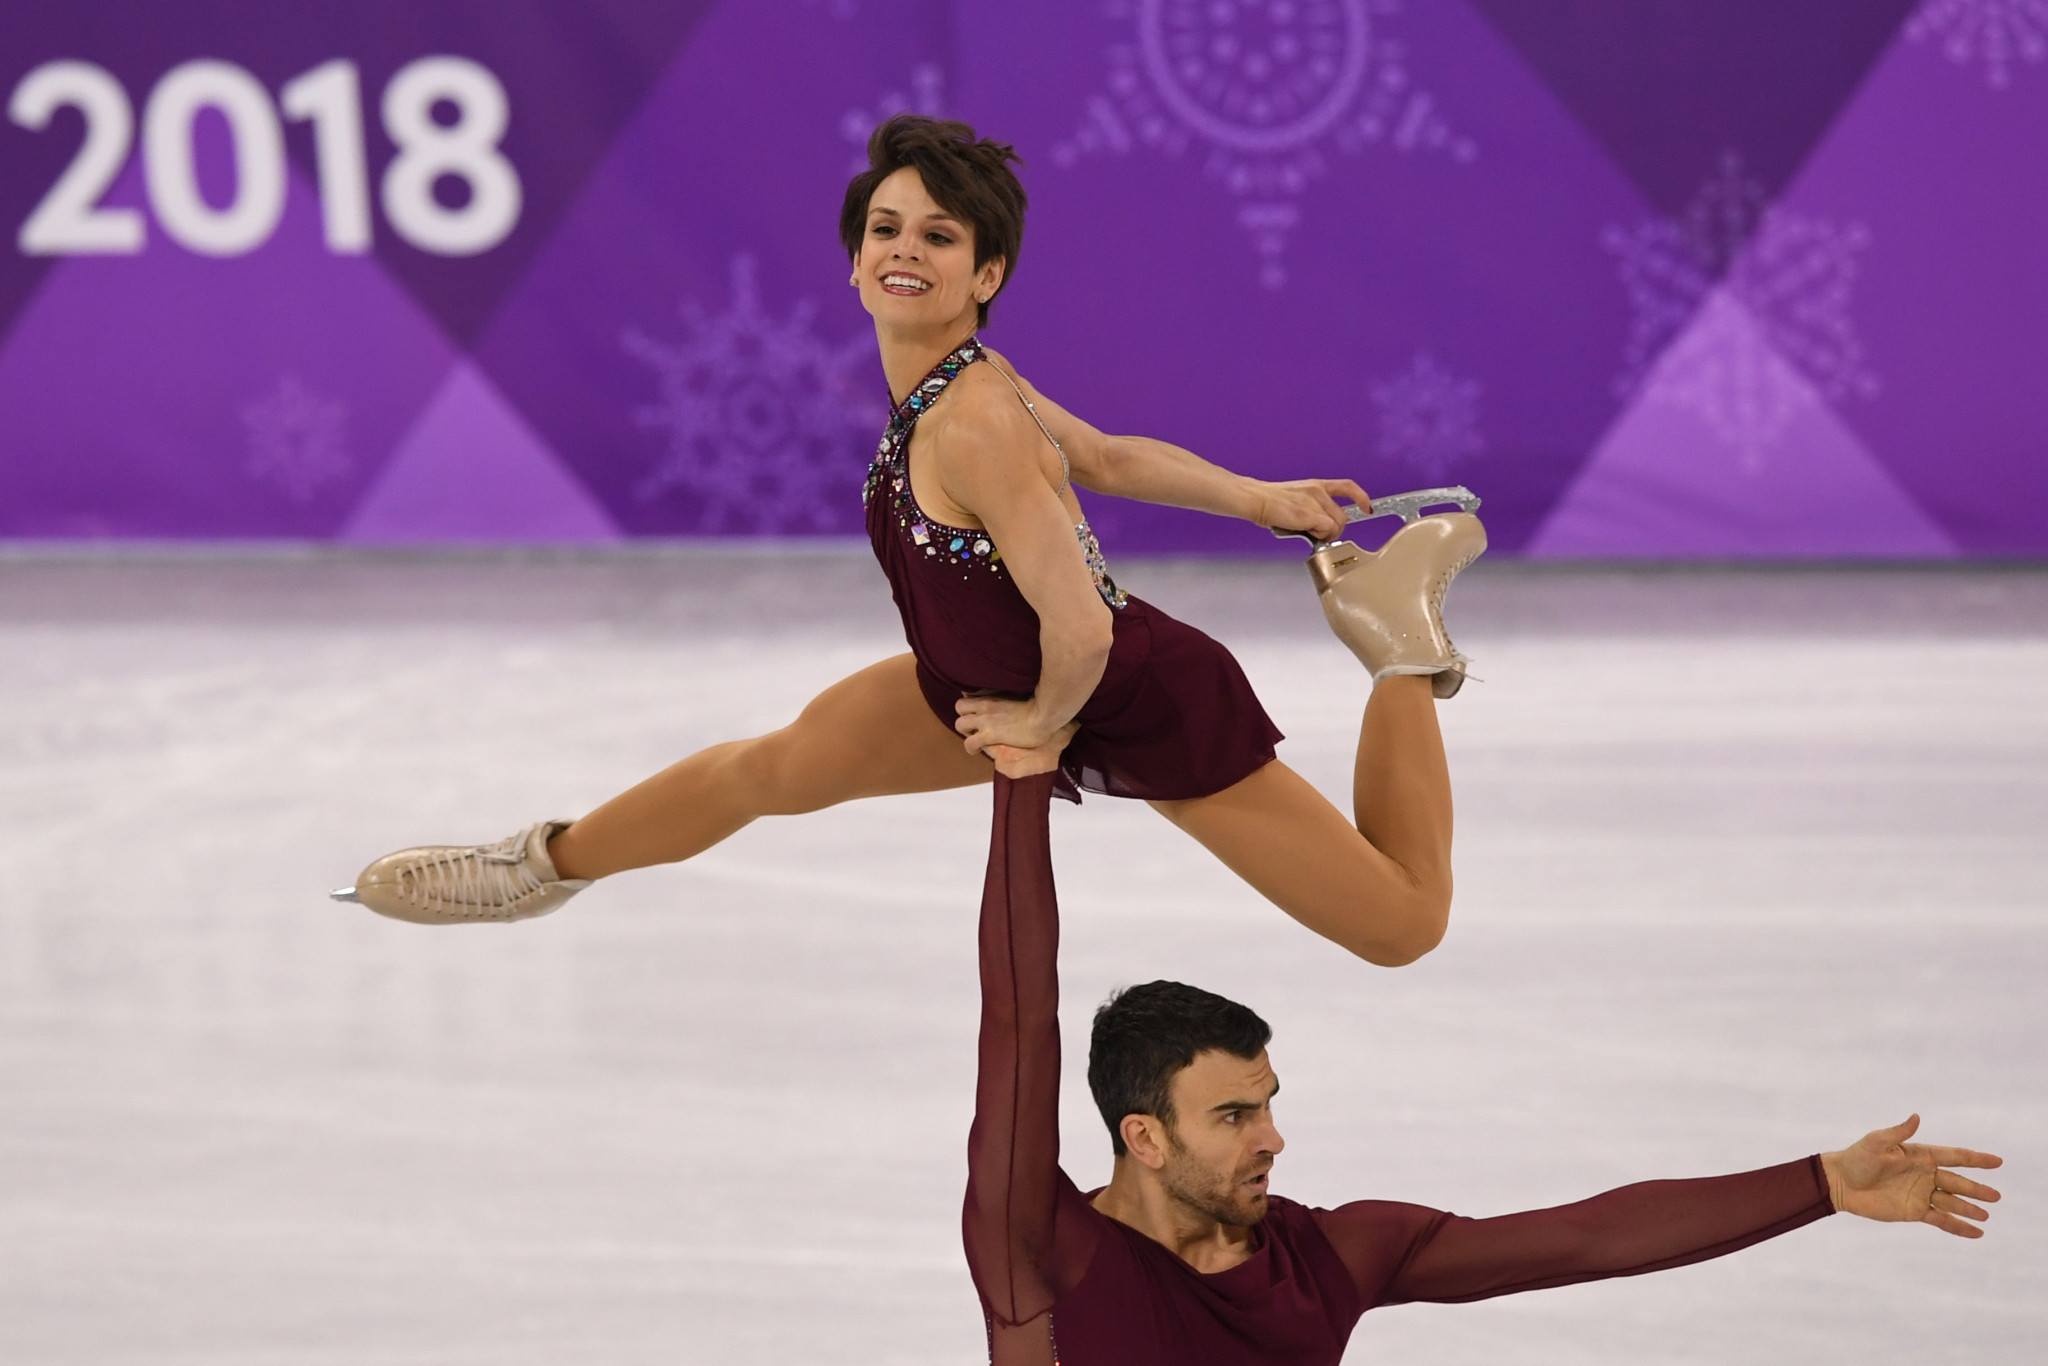 Canada's Meagan Duhamel, who won figure skating gold in the team event at the 2018 Winter Olympics, has expressed concerns over anti-virus measures in Stockholm ©Getty Images